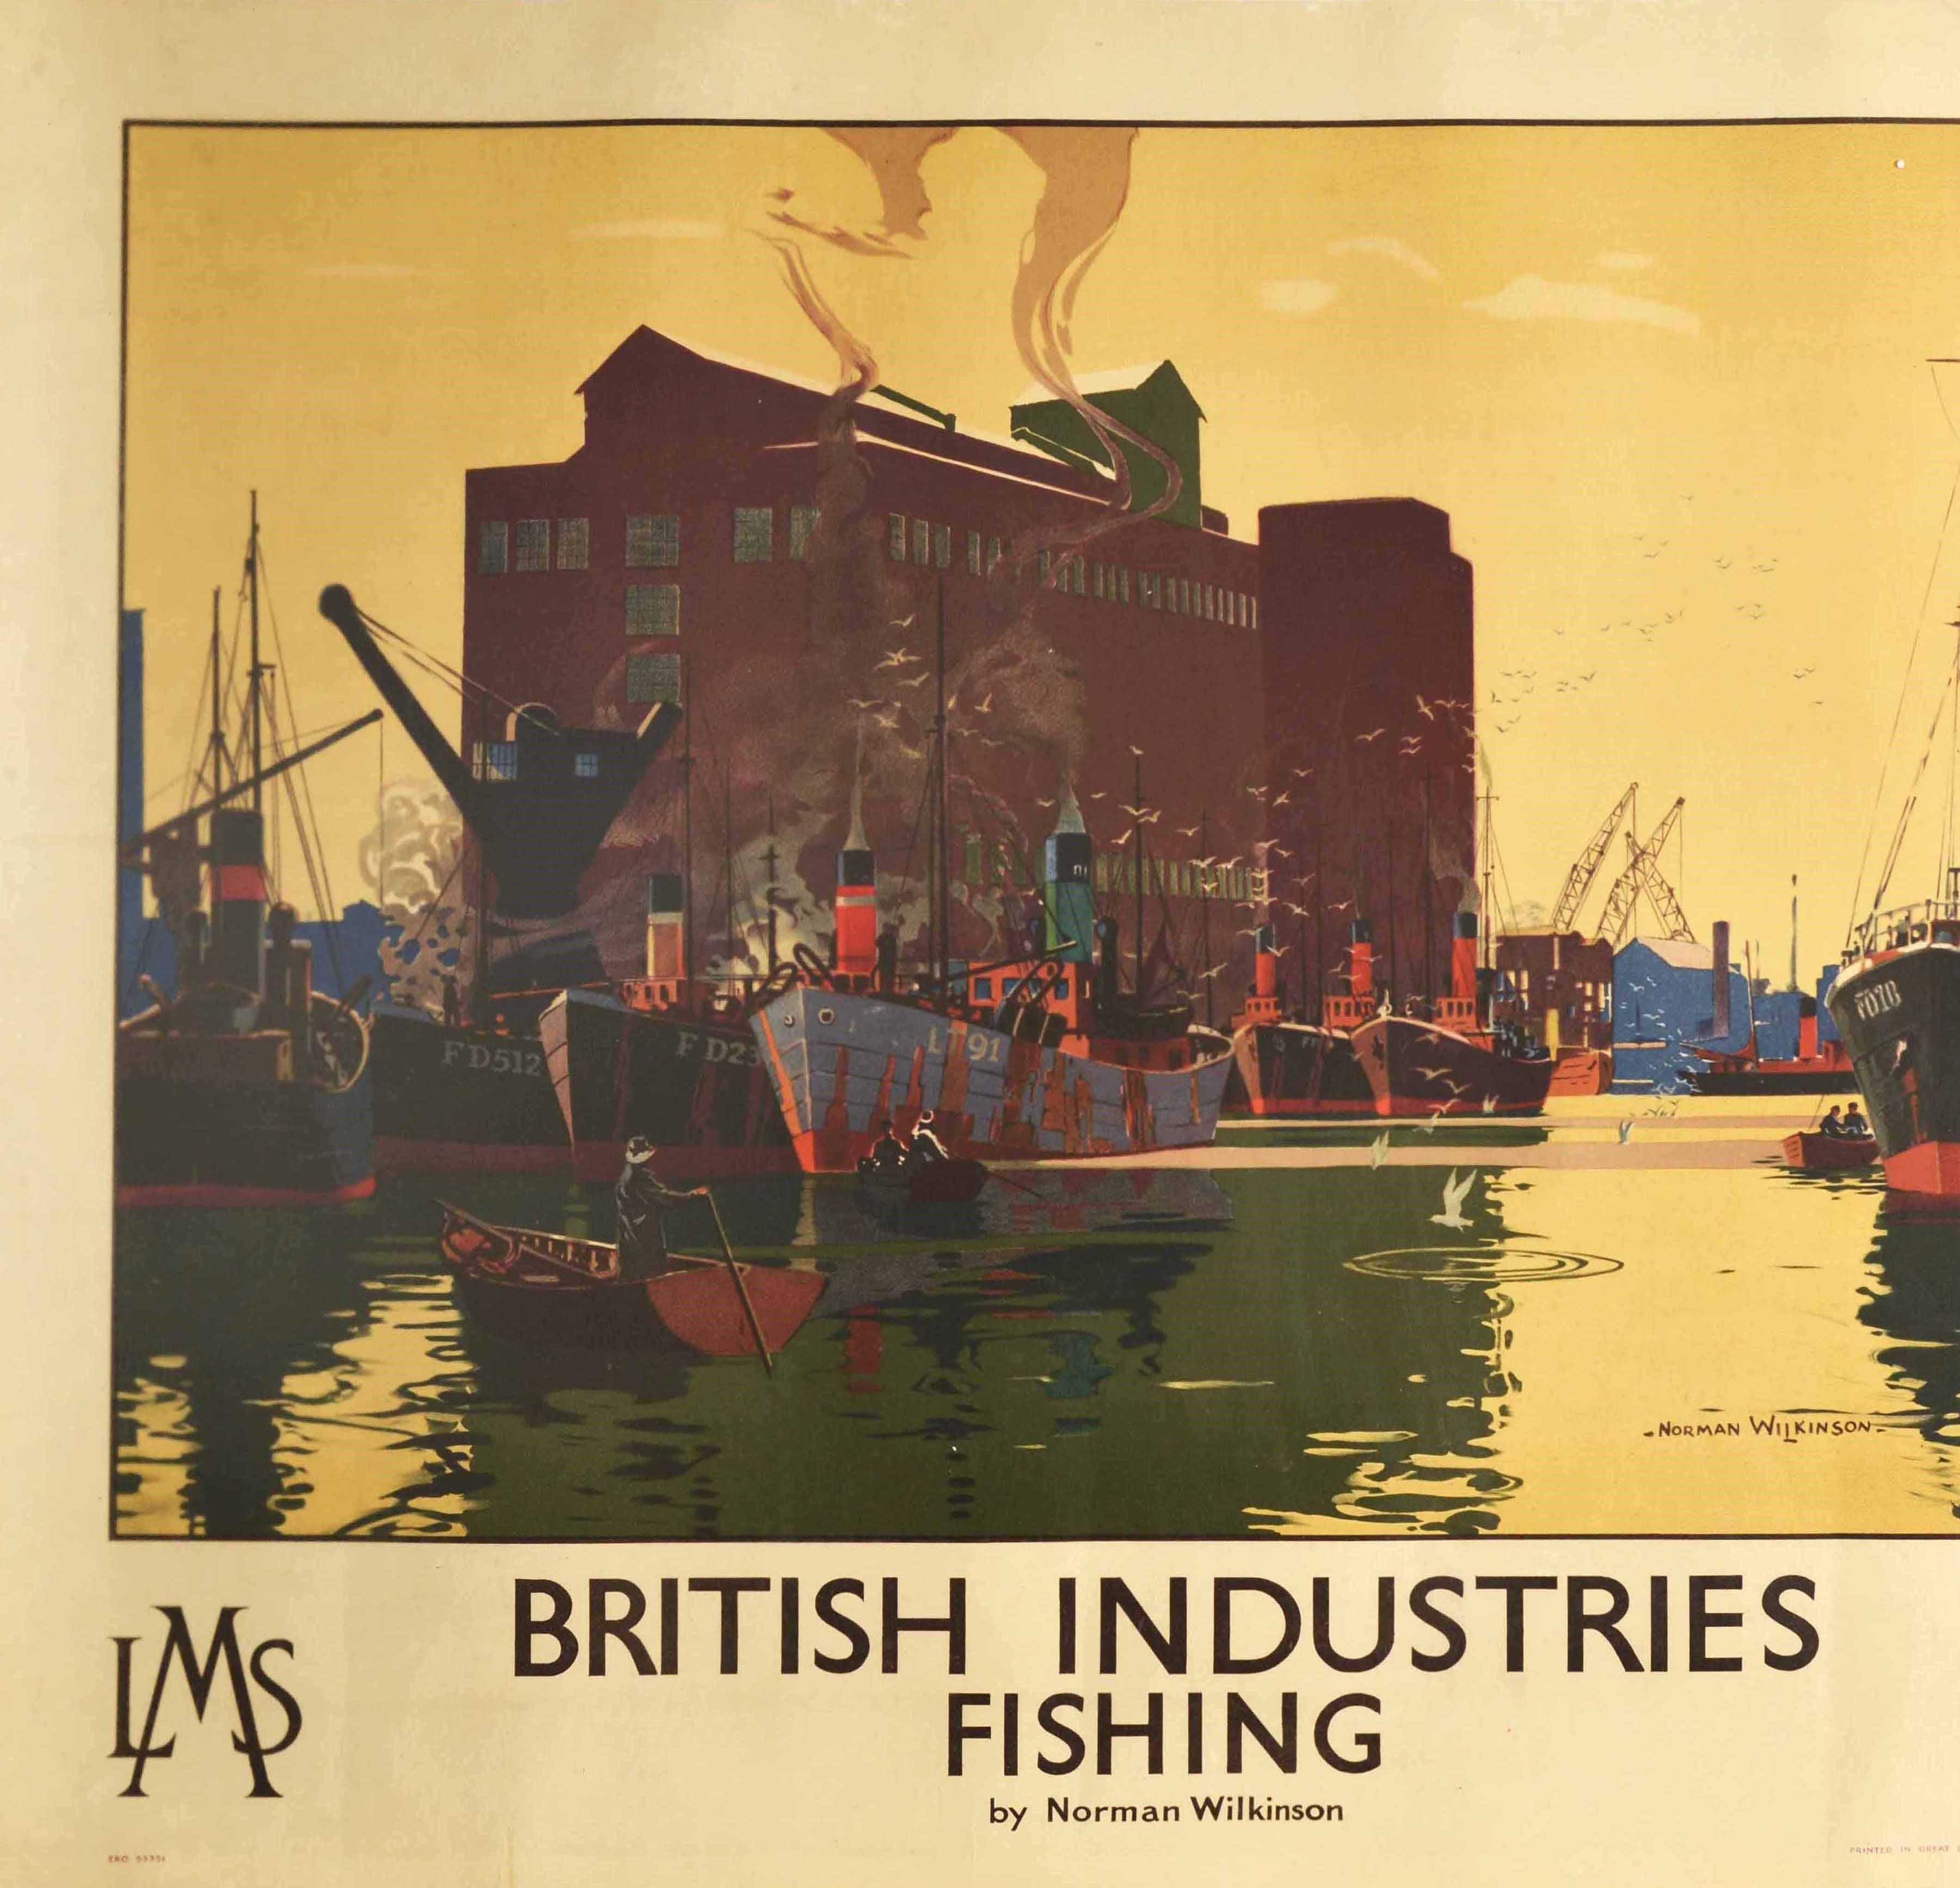 Original vintage LMS railway travel poster - British Industries Fishing - issued by the London Midland & Scottish Railway featuring a stunning painting by the notable British artist and illustrator Norman Wilkinson (1878-1971), depicting a busy